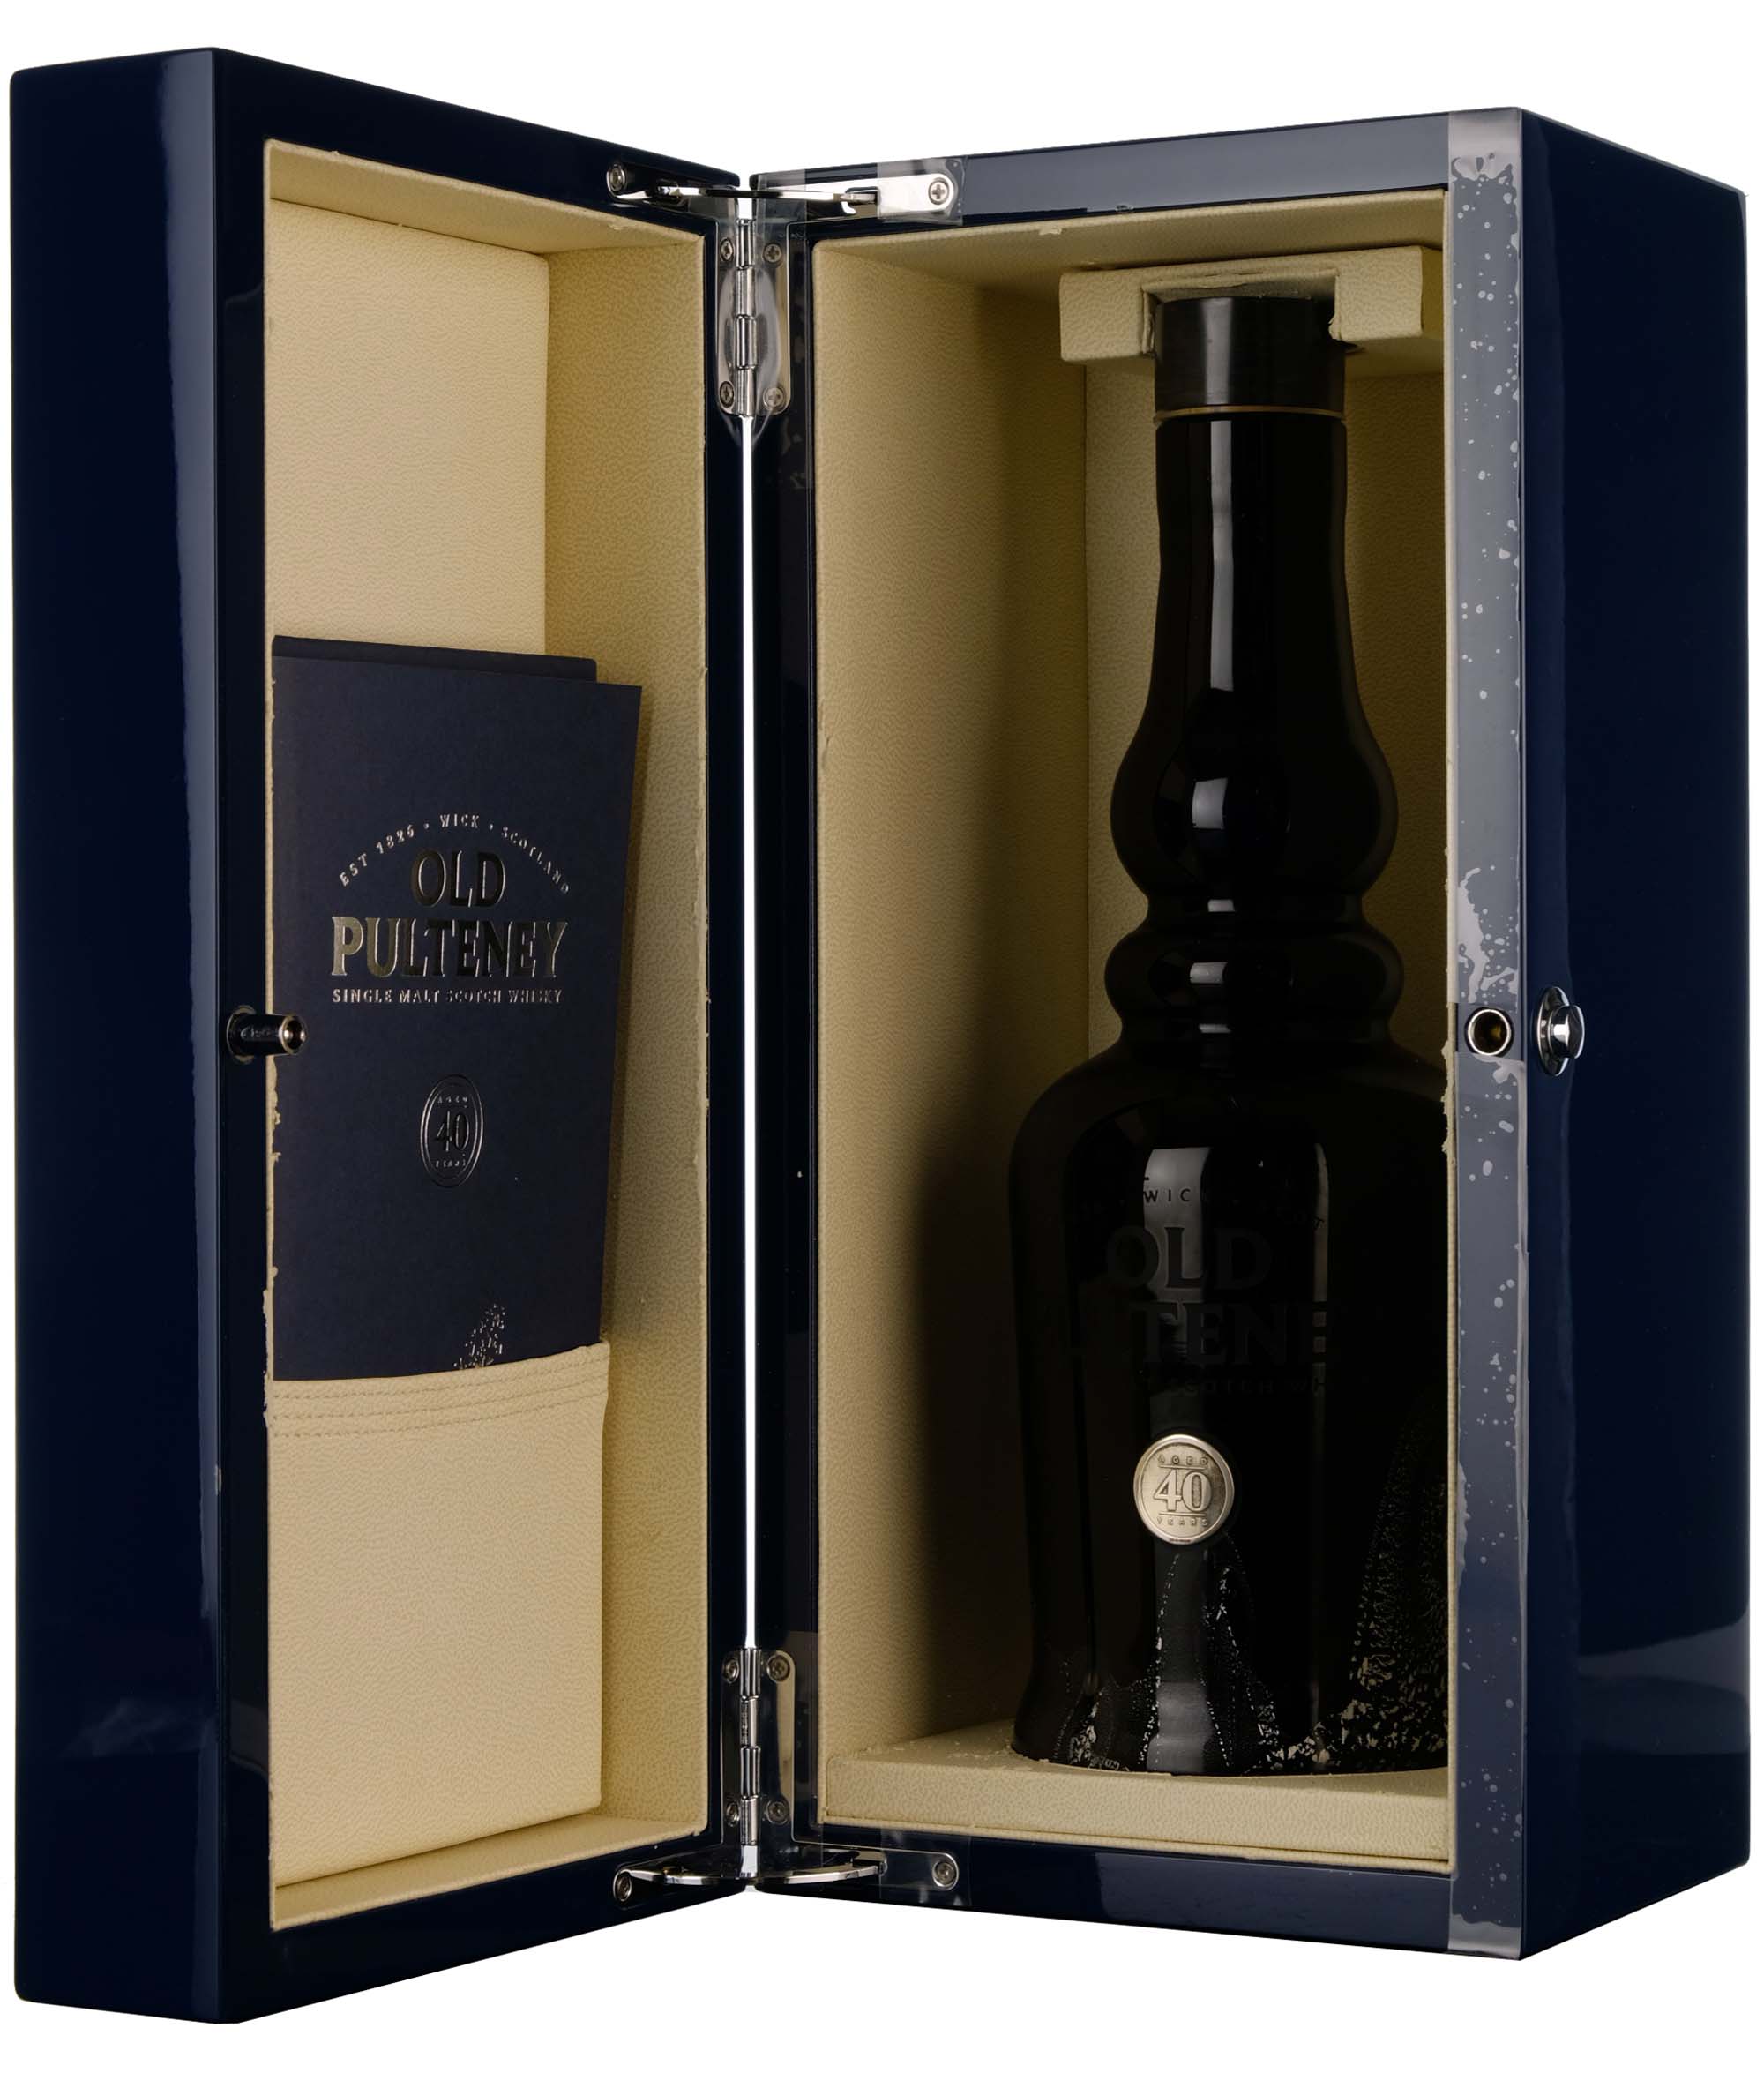 Old Pulteney 40 Year Old Bottled 2012